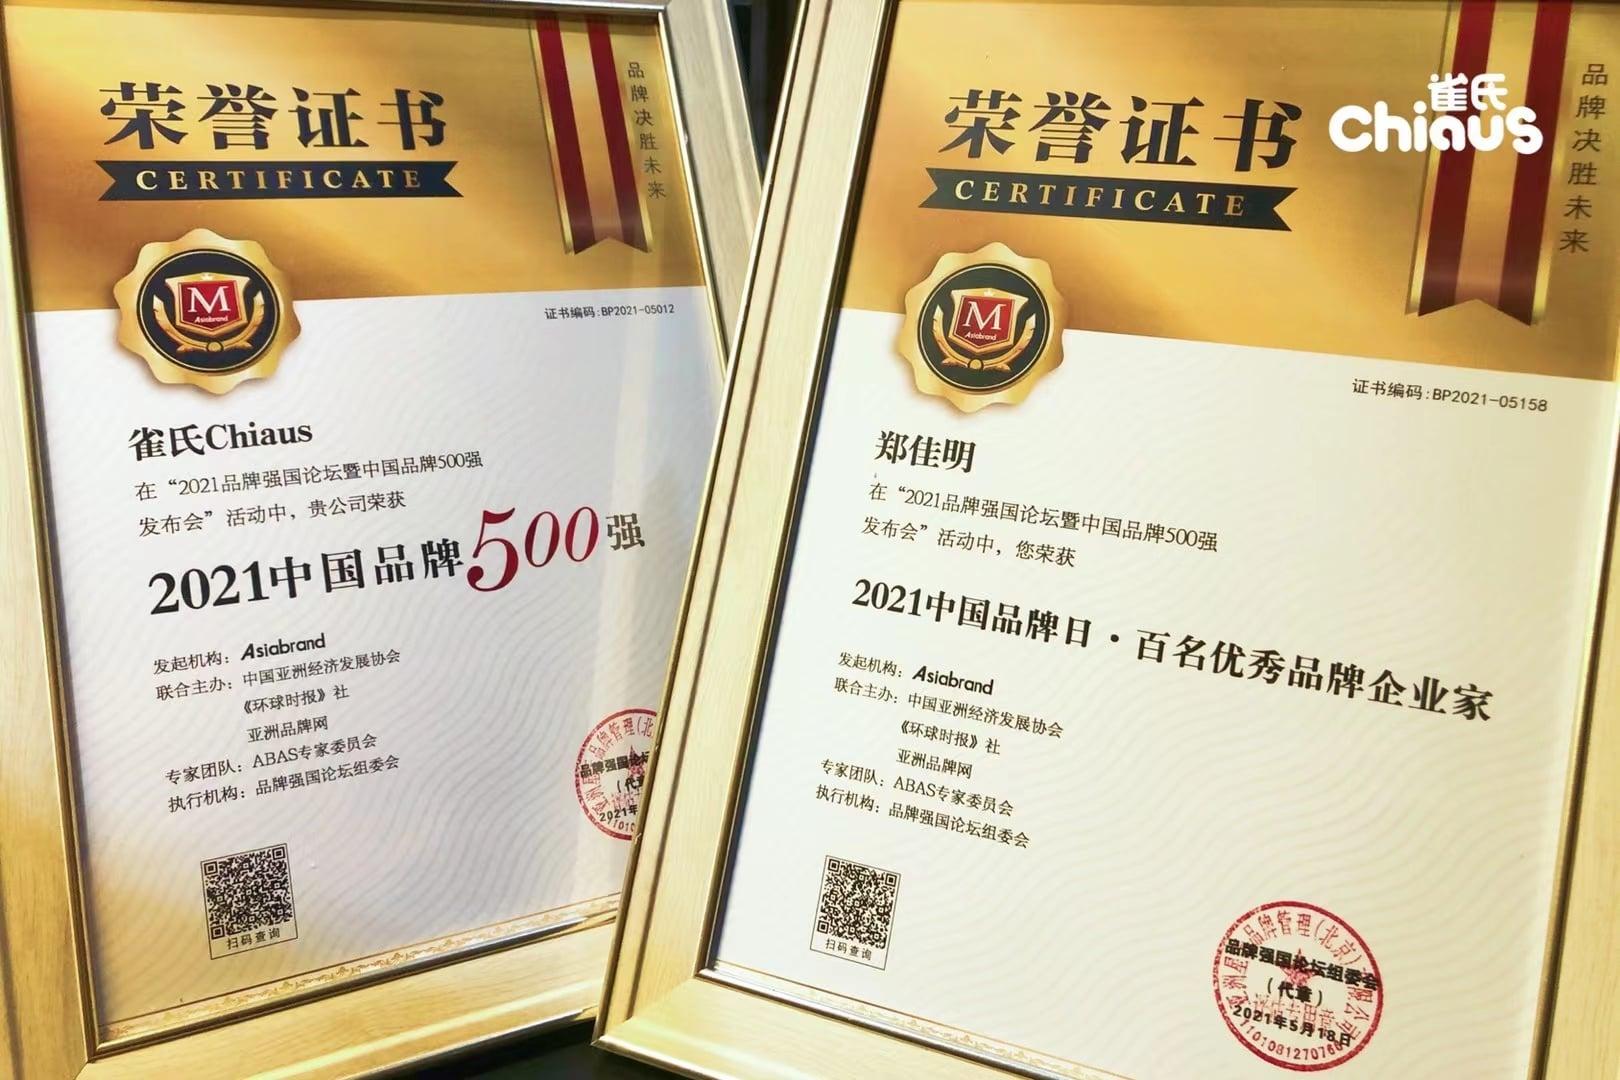 Chiaus  -Top 500 Chinese Brands” certificate